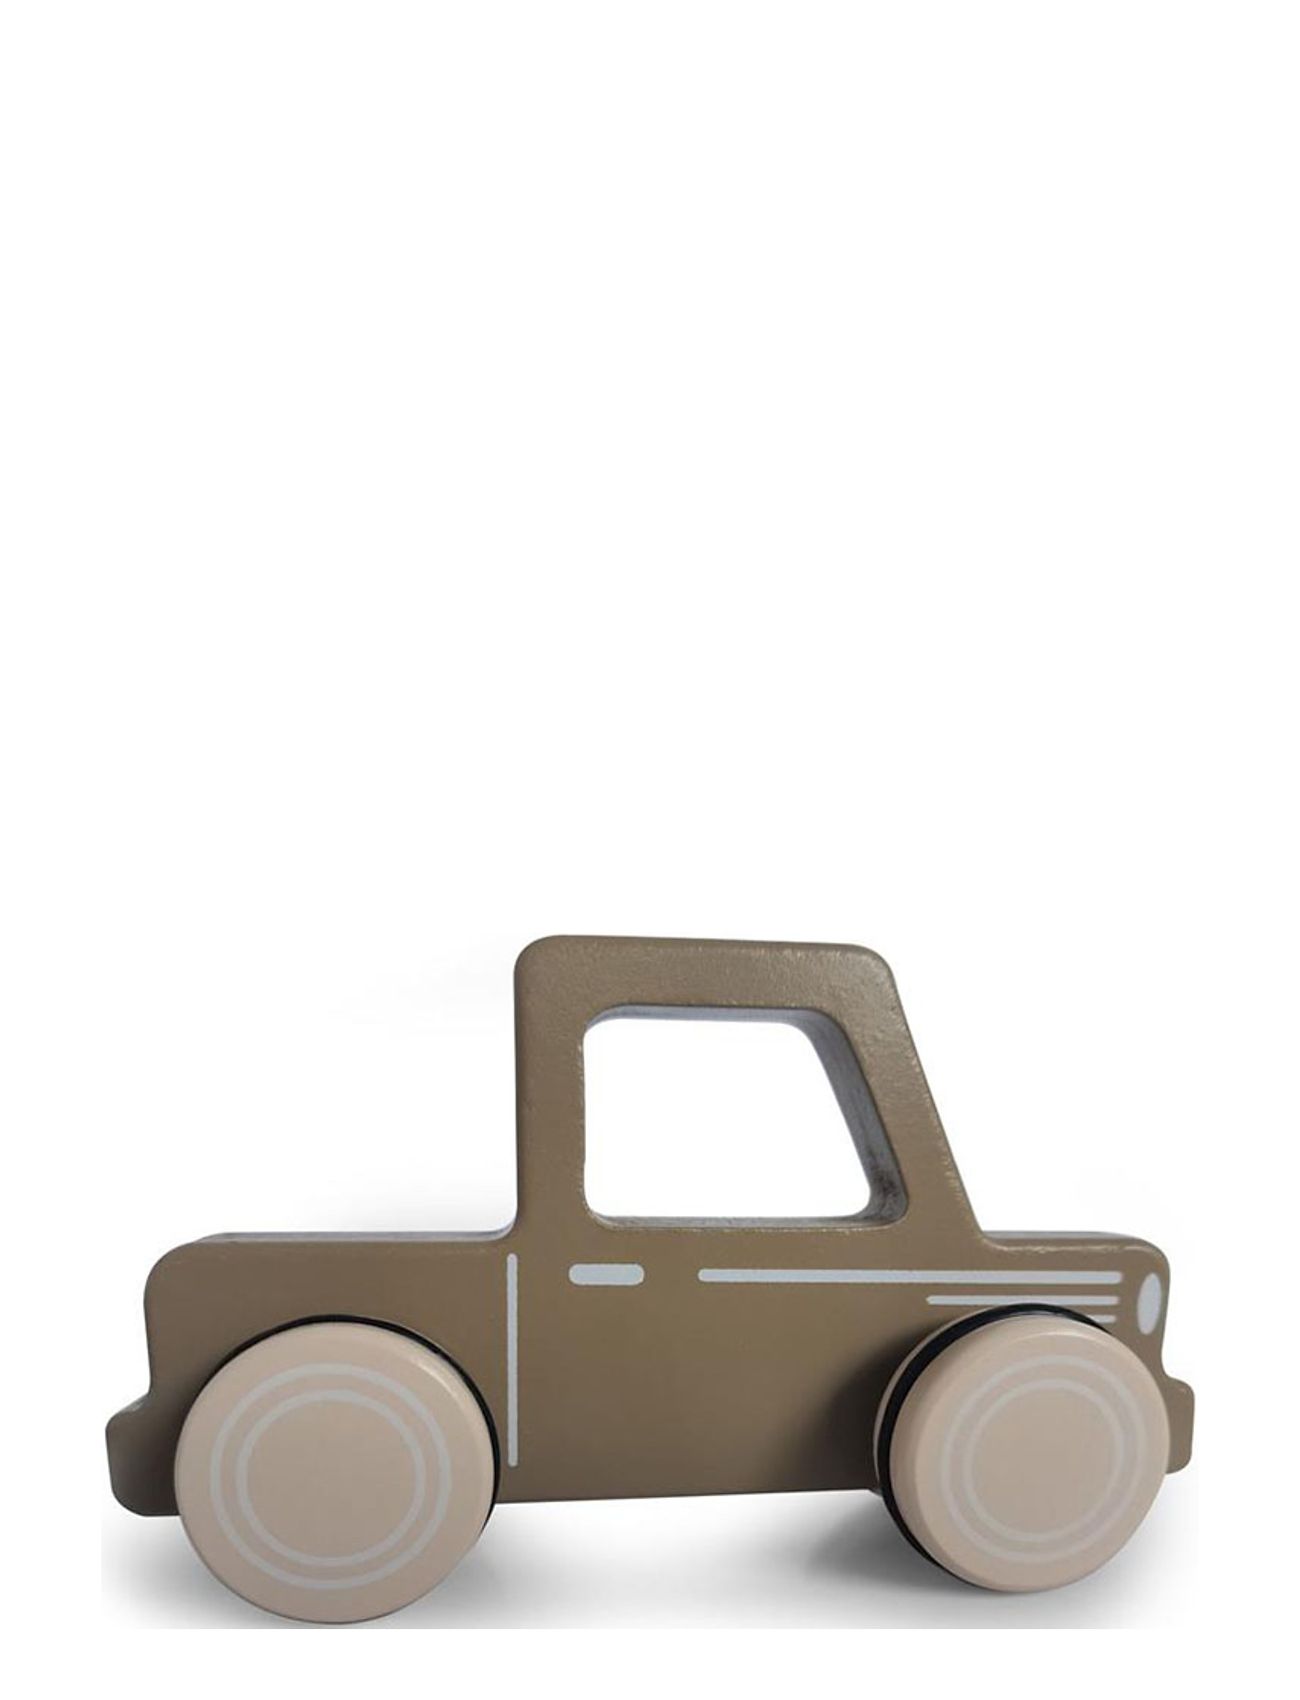 Hand Car Pickup Truck, Fsc Wood 100% Toys Toy Cars & Vehicles Toy Vehicles Trucks Brown Magni Toys